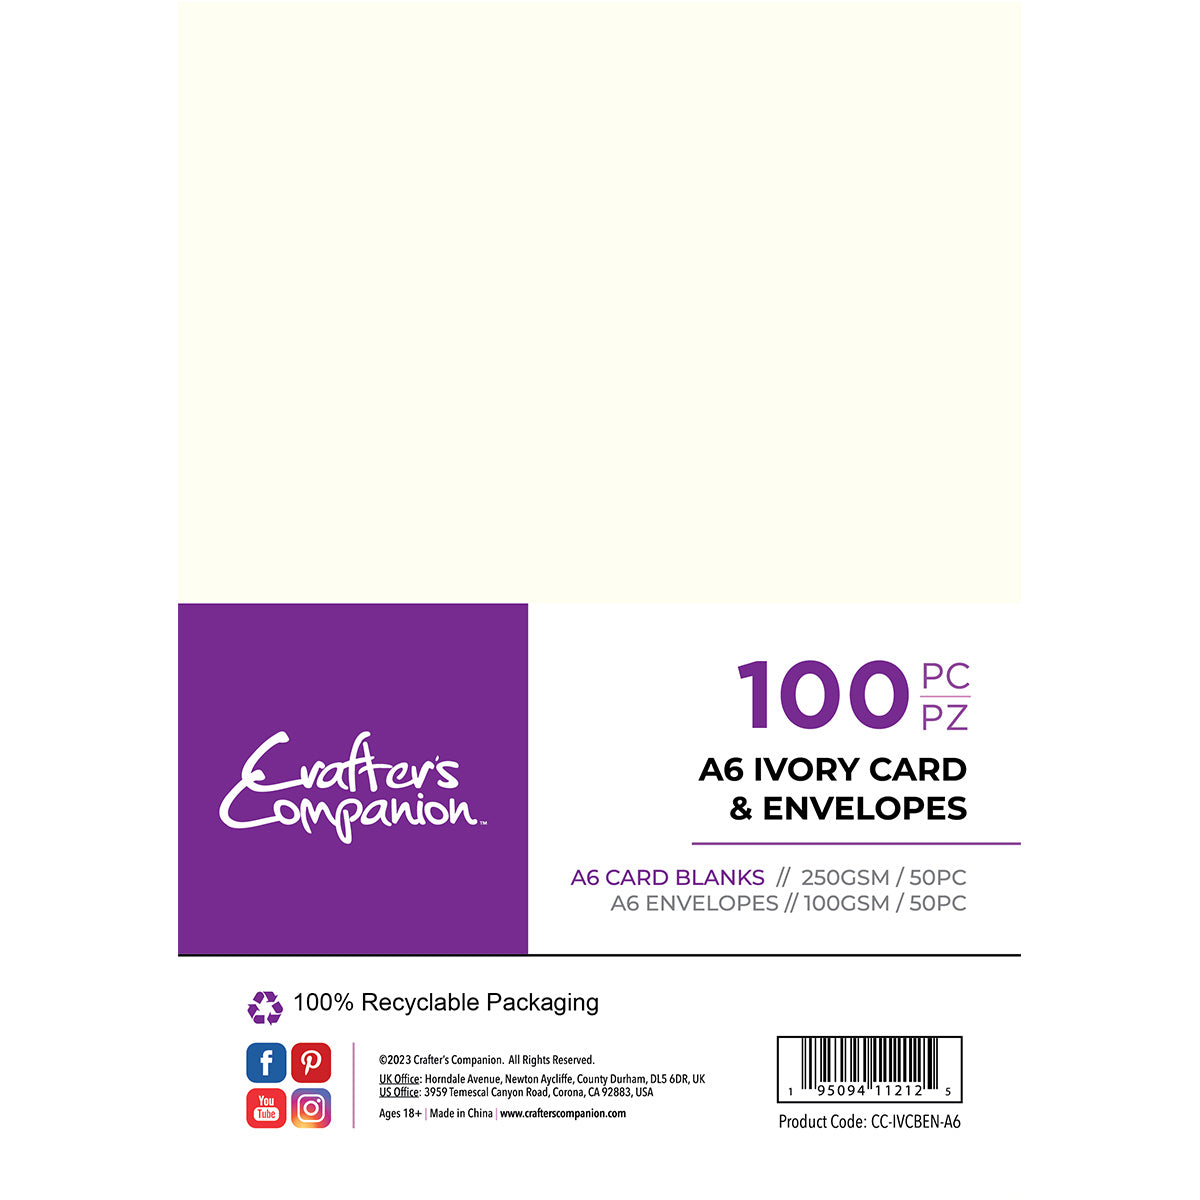 Crafter's Companion - A6 Cards & Belves 100 Piece - Avory